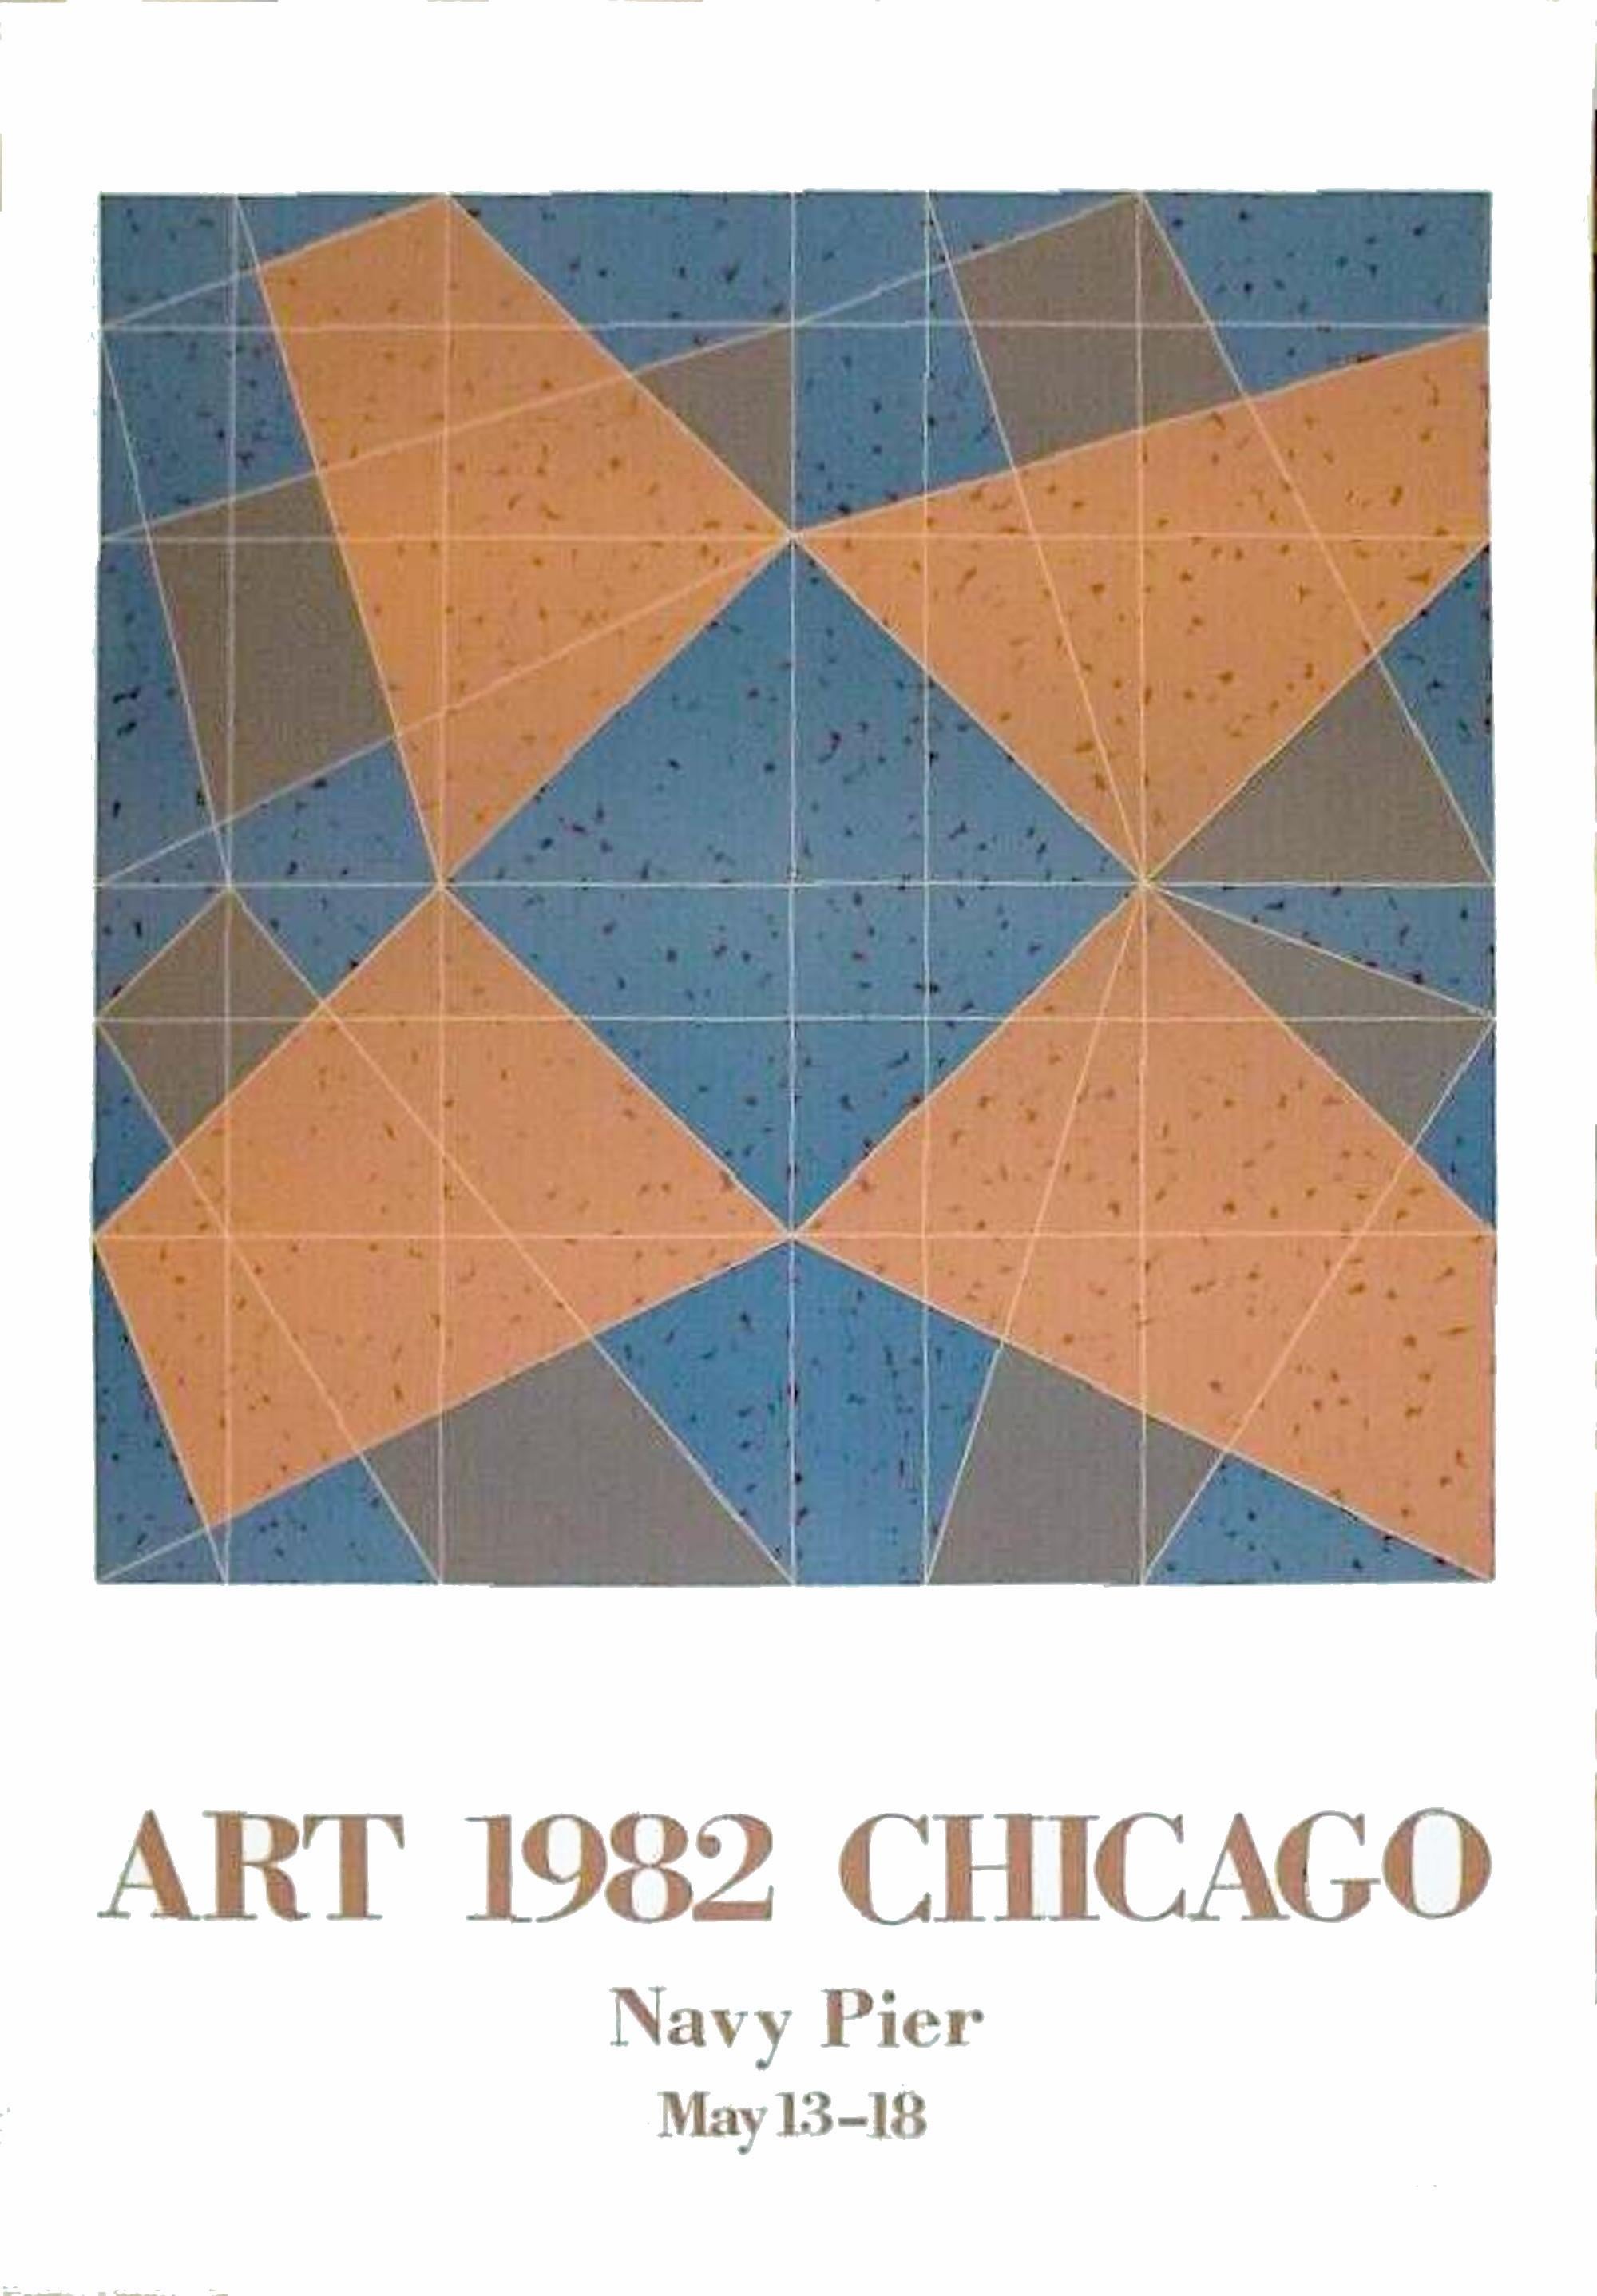 Limited Edition Art 1982 Chicago Navy Pier Abstract Poster geometric abstraction - Print by Jack Tworkov